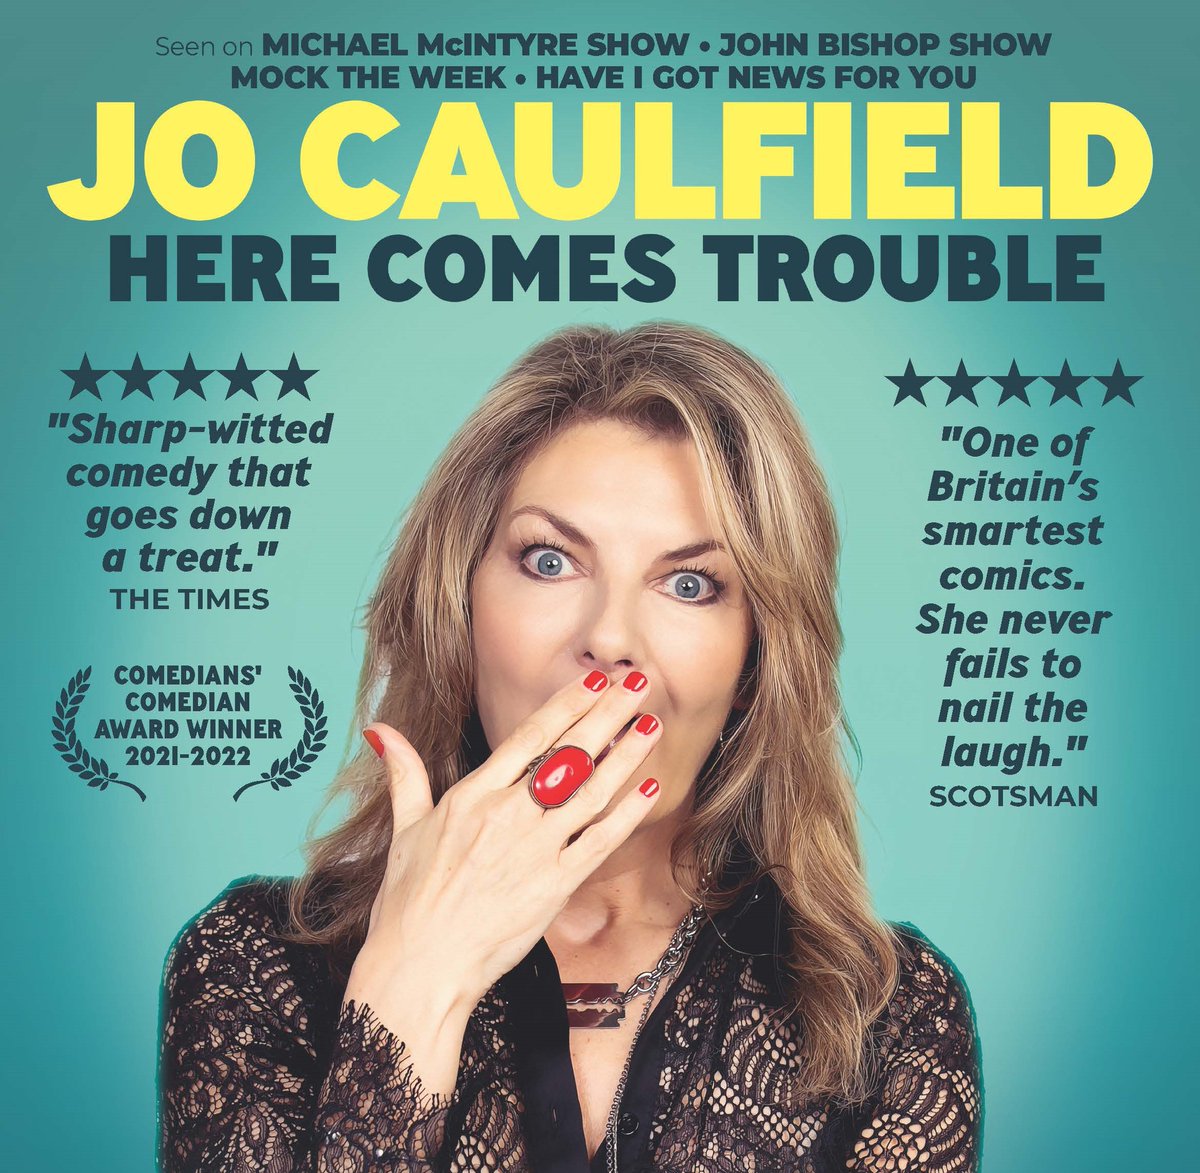 COMPETITION TIME!

WIN 2 TICKETS
@Jo_Caulfield 
@Ketteringarts 18.05

Jo’s moving but also funny memoir about her sister Annie was published in Aug '23, with all proceeds being donated to Macmillan Cancer Support

To WIN, tell us – what is the title of Jo’s book?

Respond below